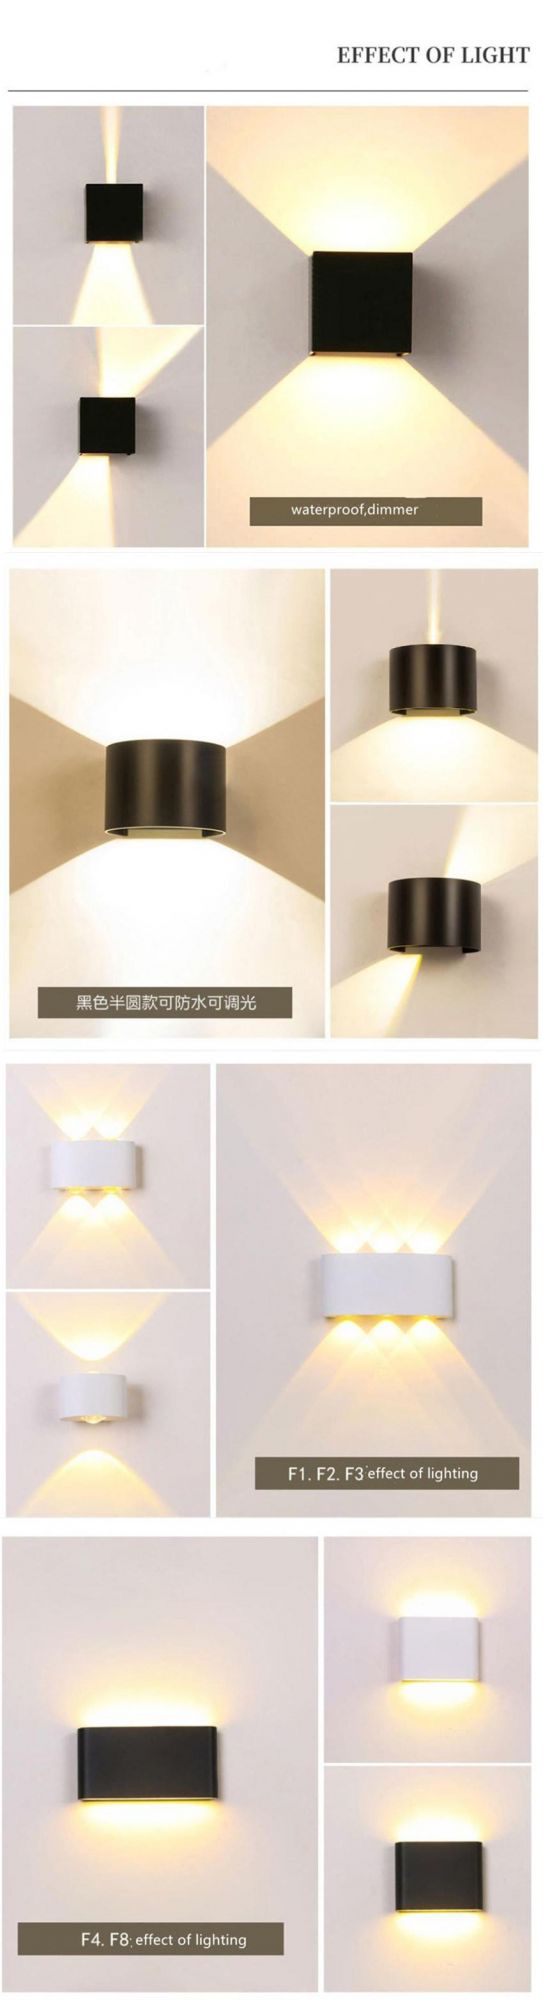 Wholesale Different Styles of Outdoor Dimming Wall Lamp Waterproof Outdoor Patio Table Lamp